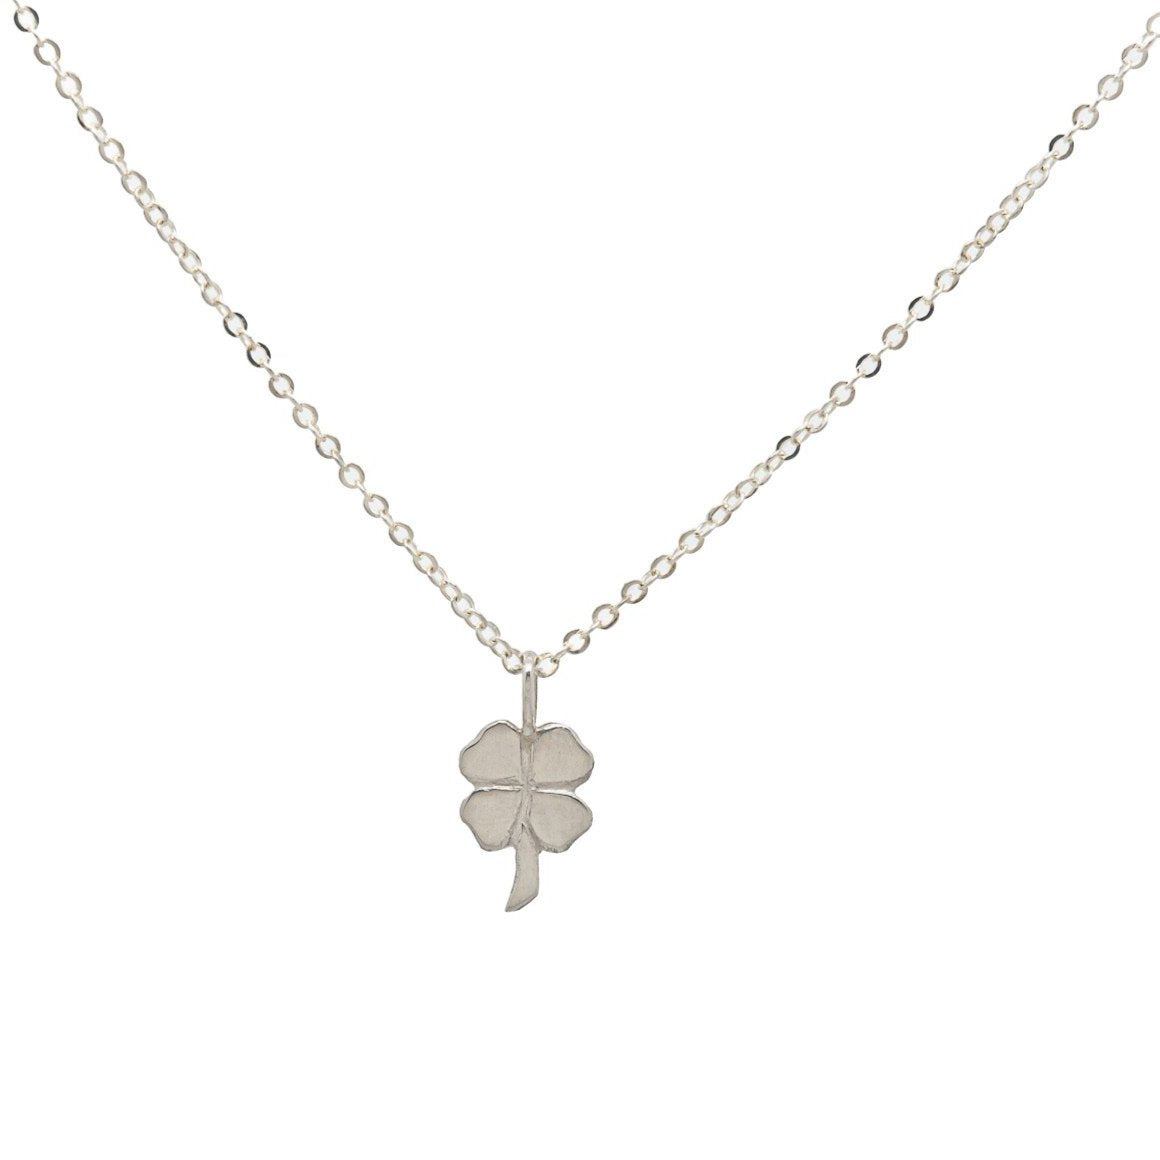 Designer Clover Necklace Fashion Flowers Four Leaf Clover Cleef Womens  Luxury Designer Necklace Necklaces Jewelry Gifts From Henryjewelrys, $29.98